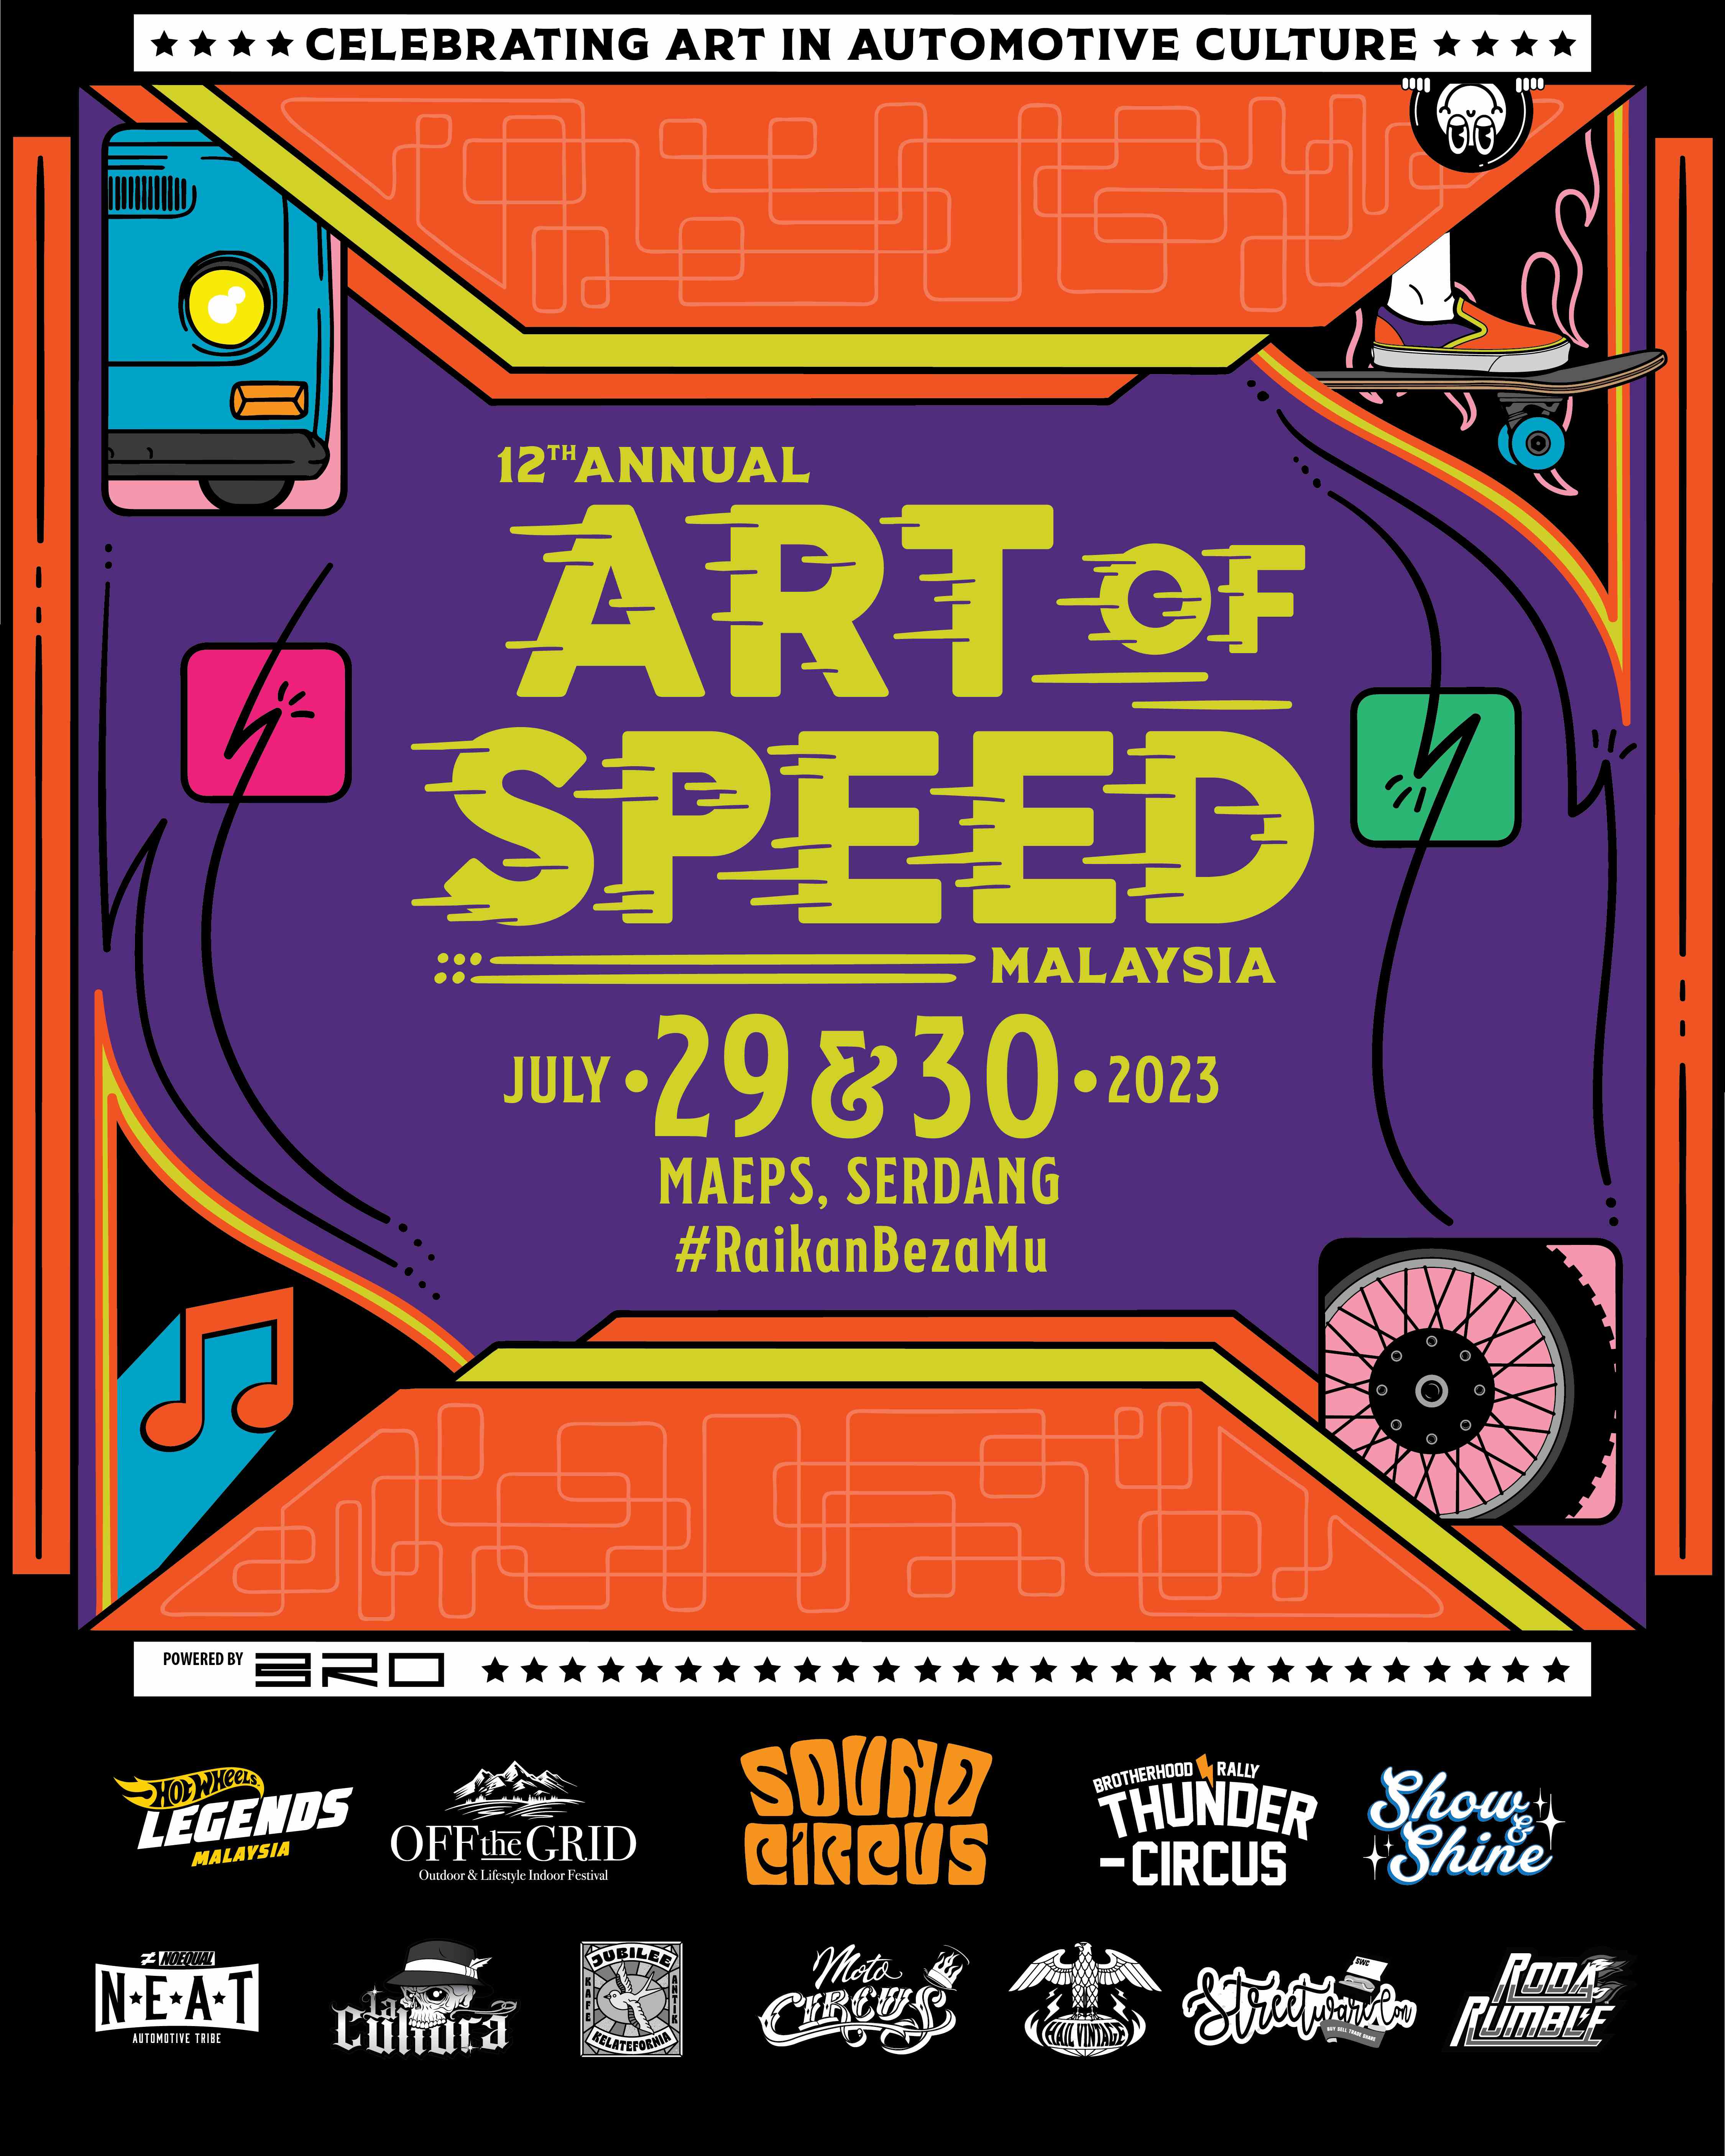 TopGear Art of Speed Malaysia returns for another round of "Kustom